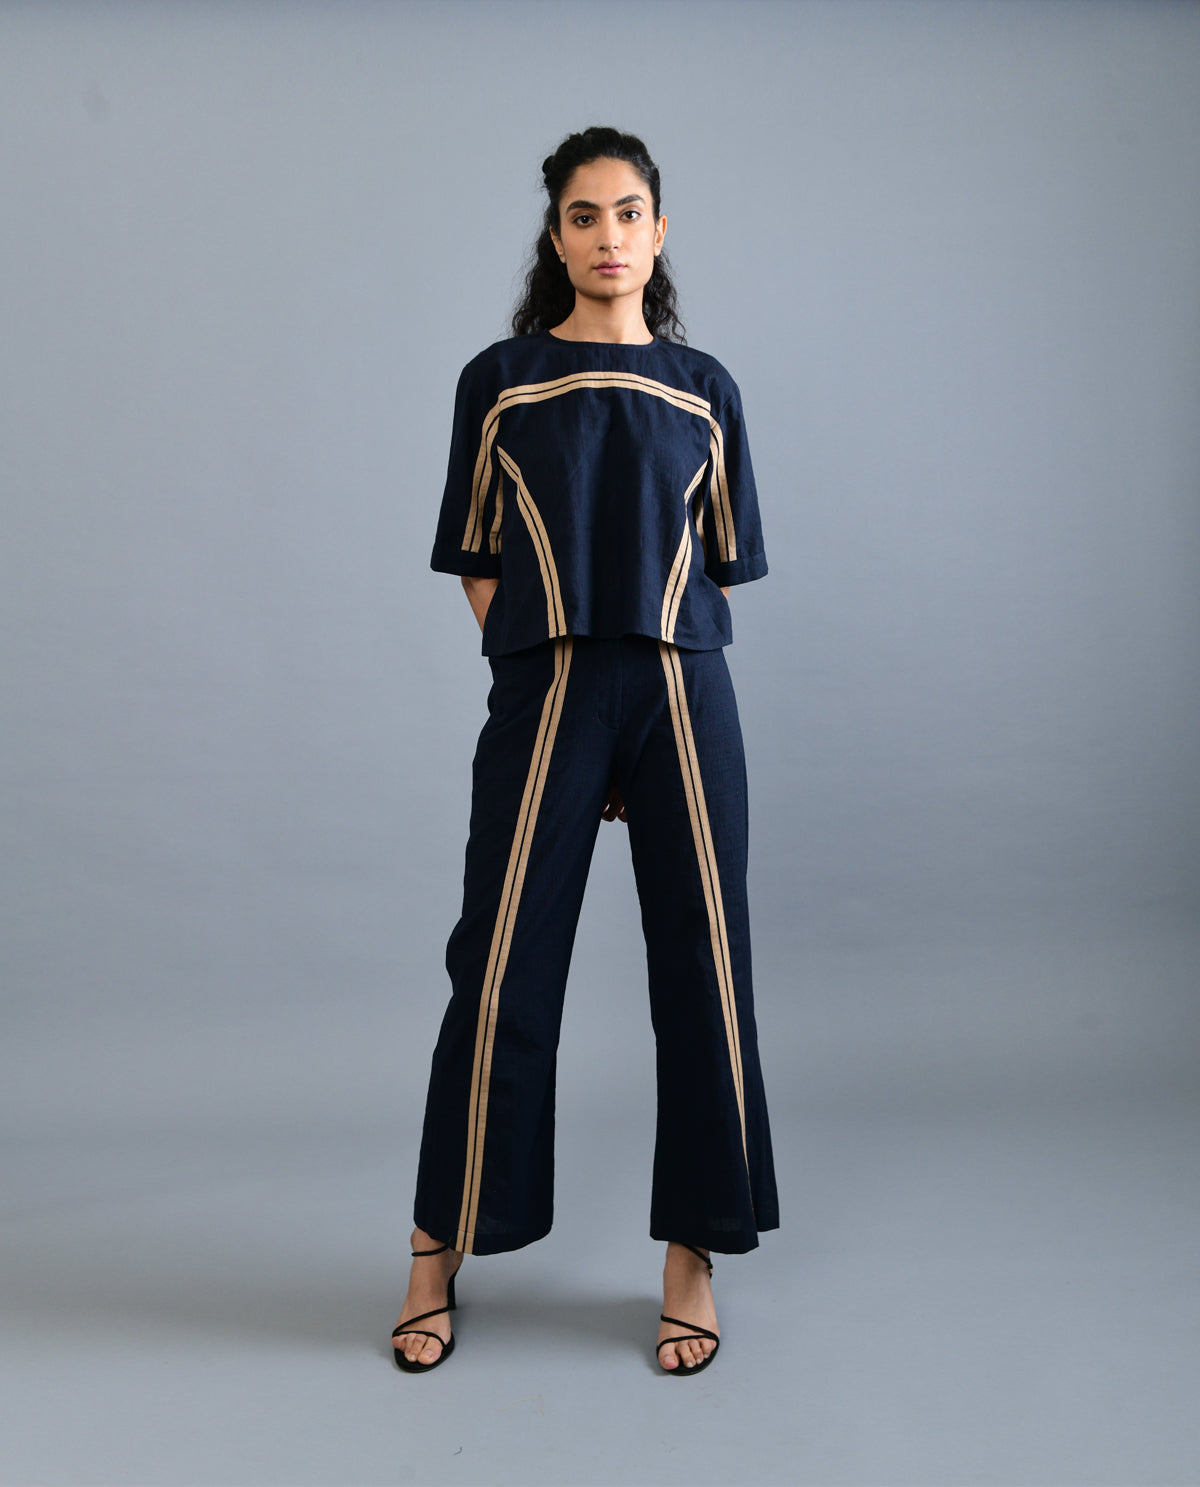 Black Solid Co-ord Set at Kamakhyaa by Rias Jaipur. This item is Black, Casual Wear, Co-ord Sets, Handloom Cotton, Handspun, Handwoven, Hue, Office, Office Wear Co-ords, Regular Fit, Solids, Stripes, Womenswear